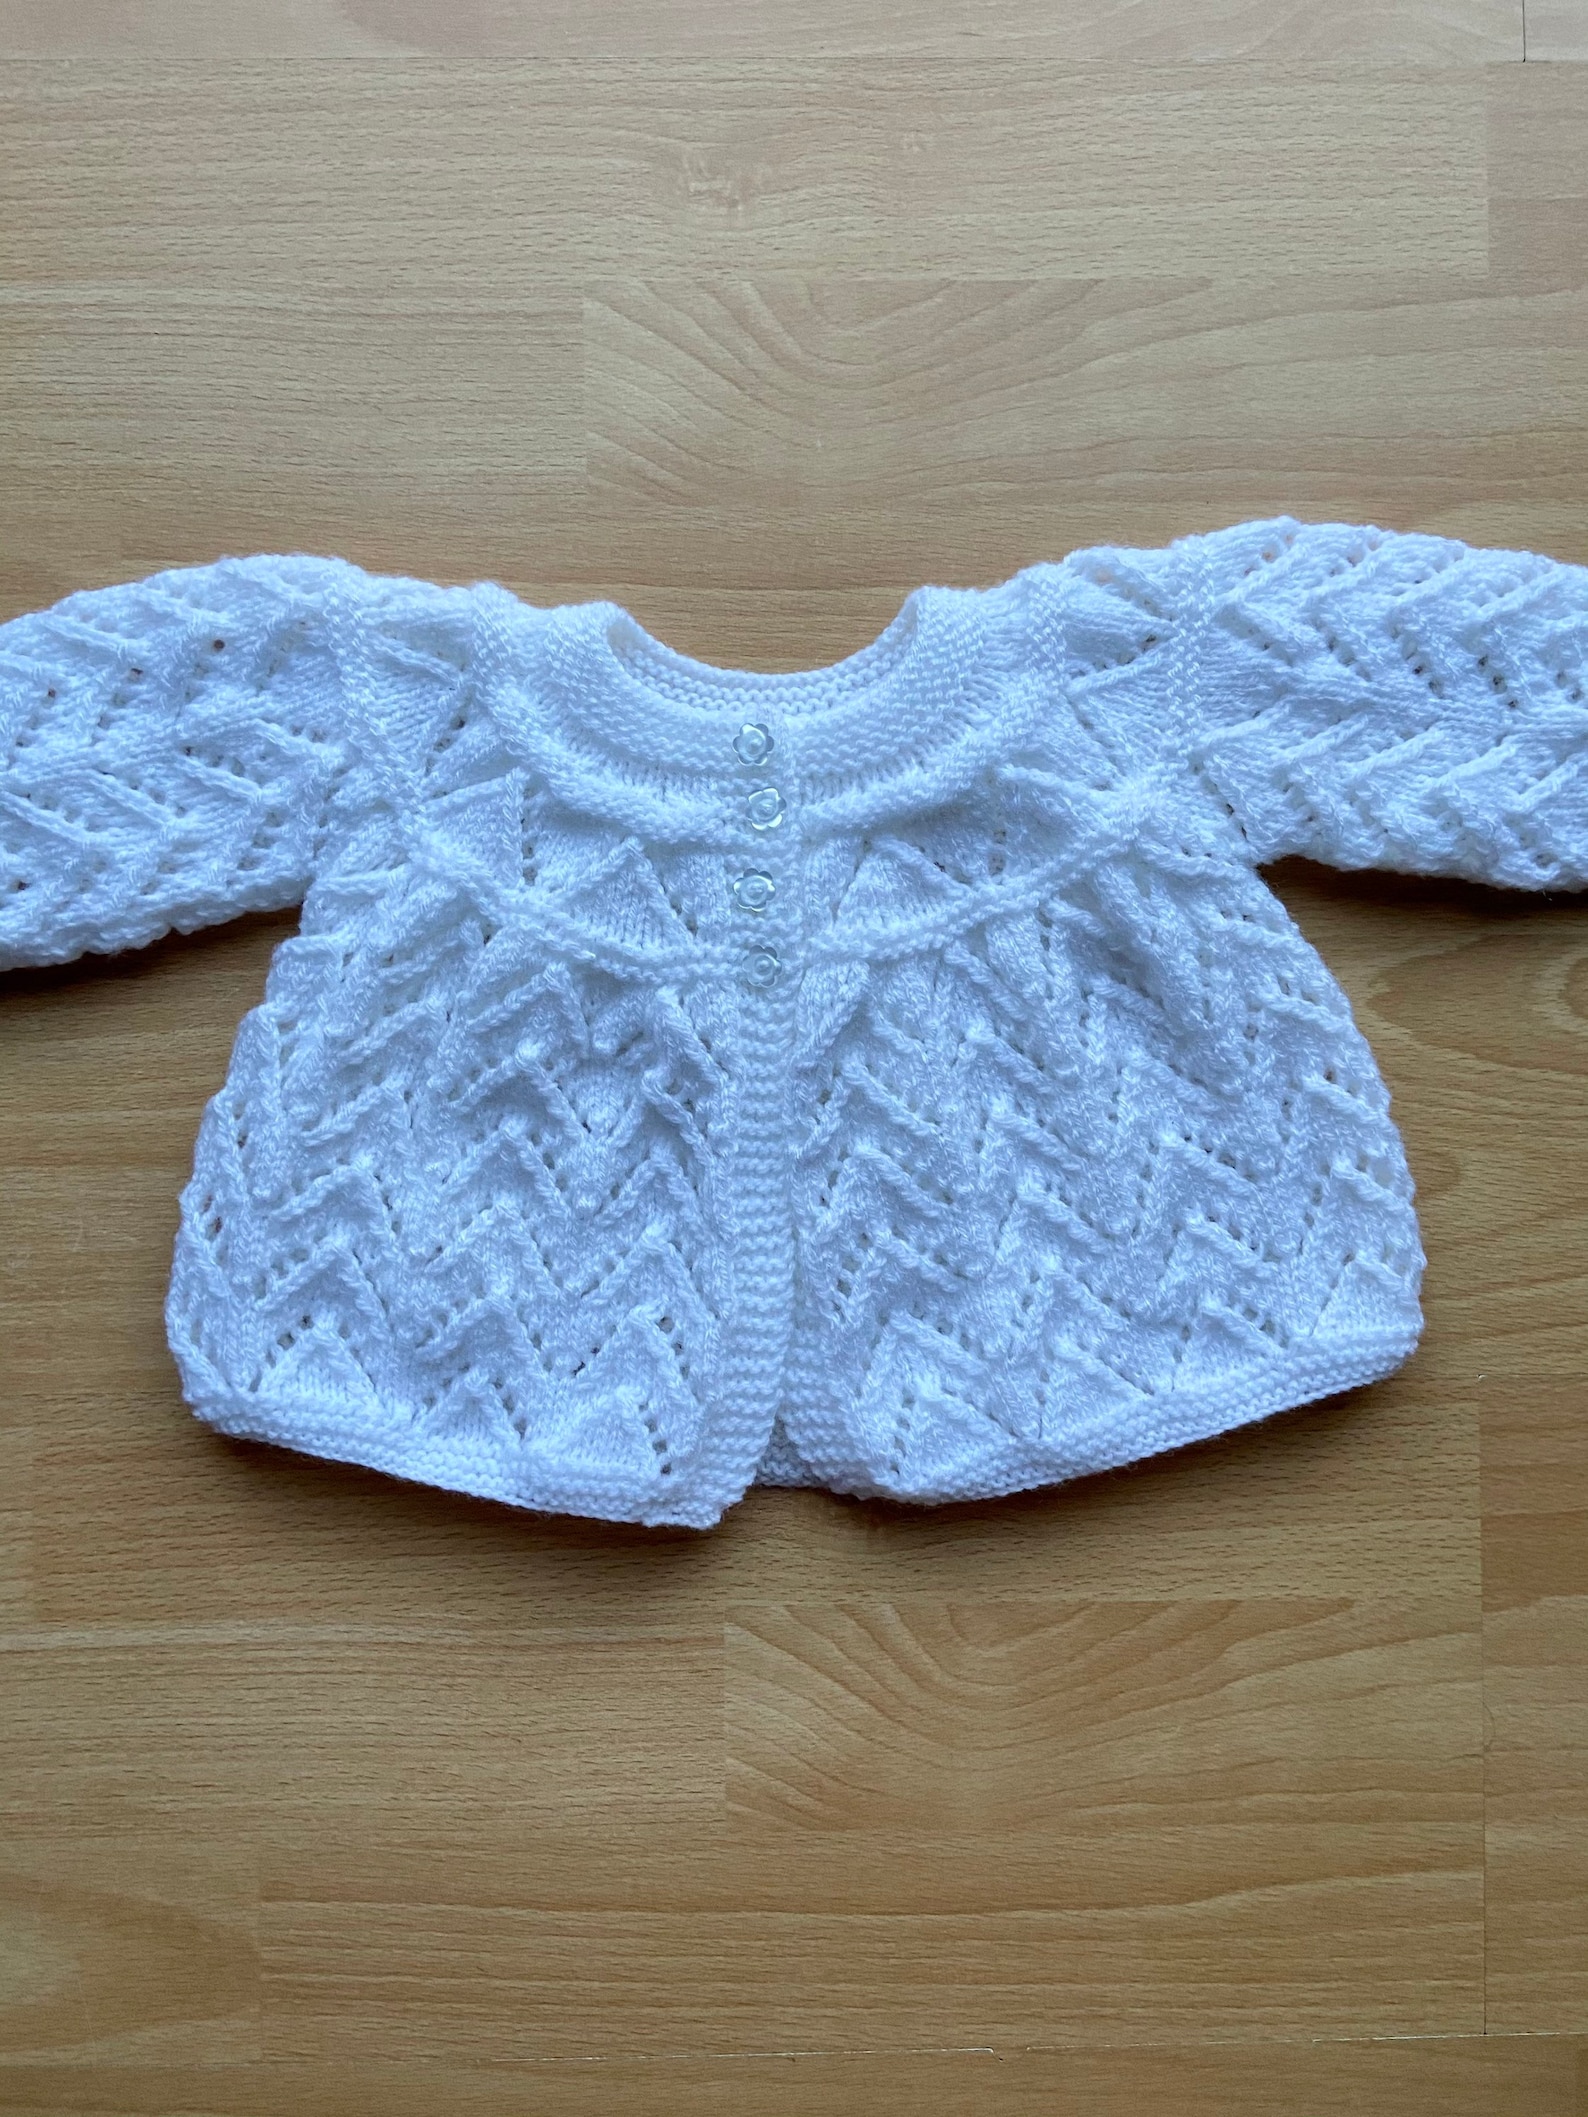 Hand Knitted Baby Matinee Jacket/Coat/Cardigan Made to order | Etsy